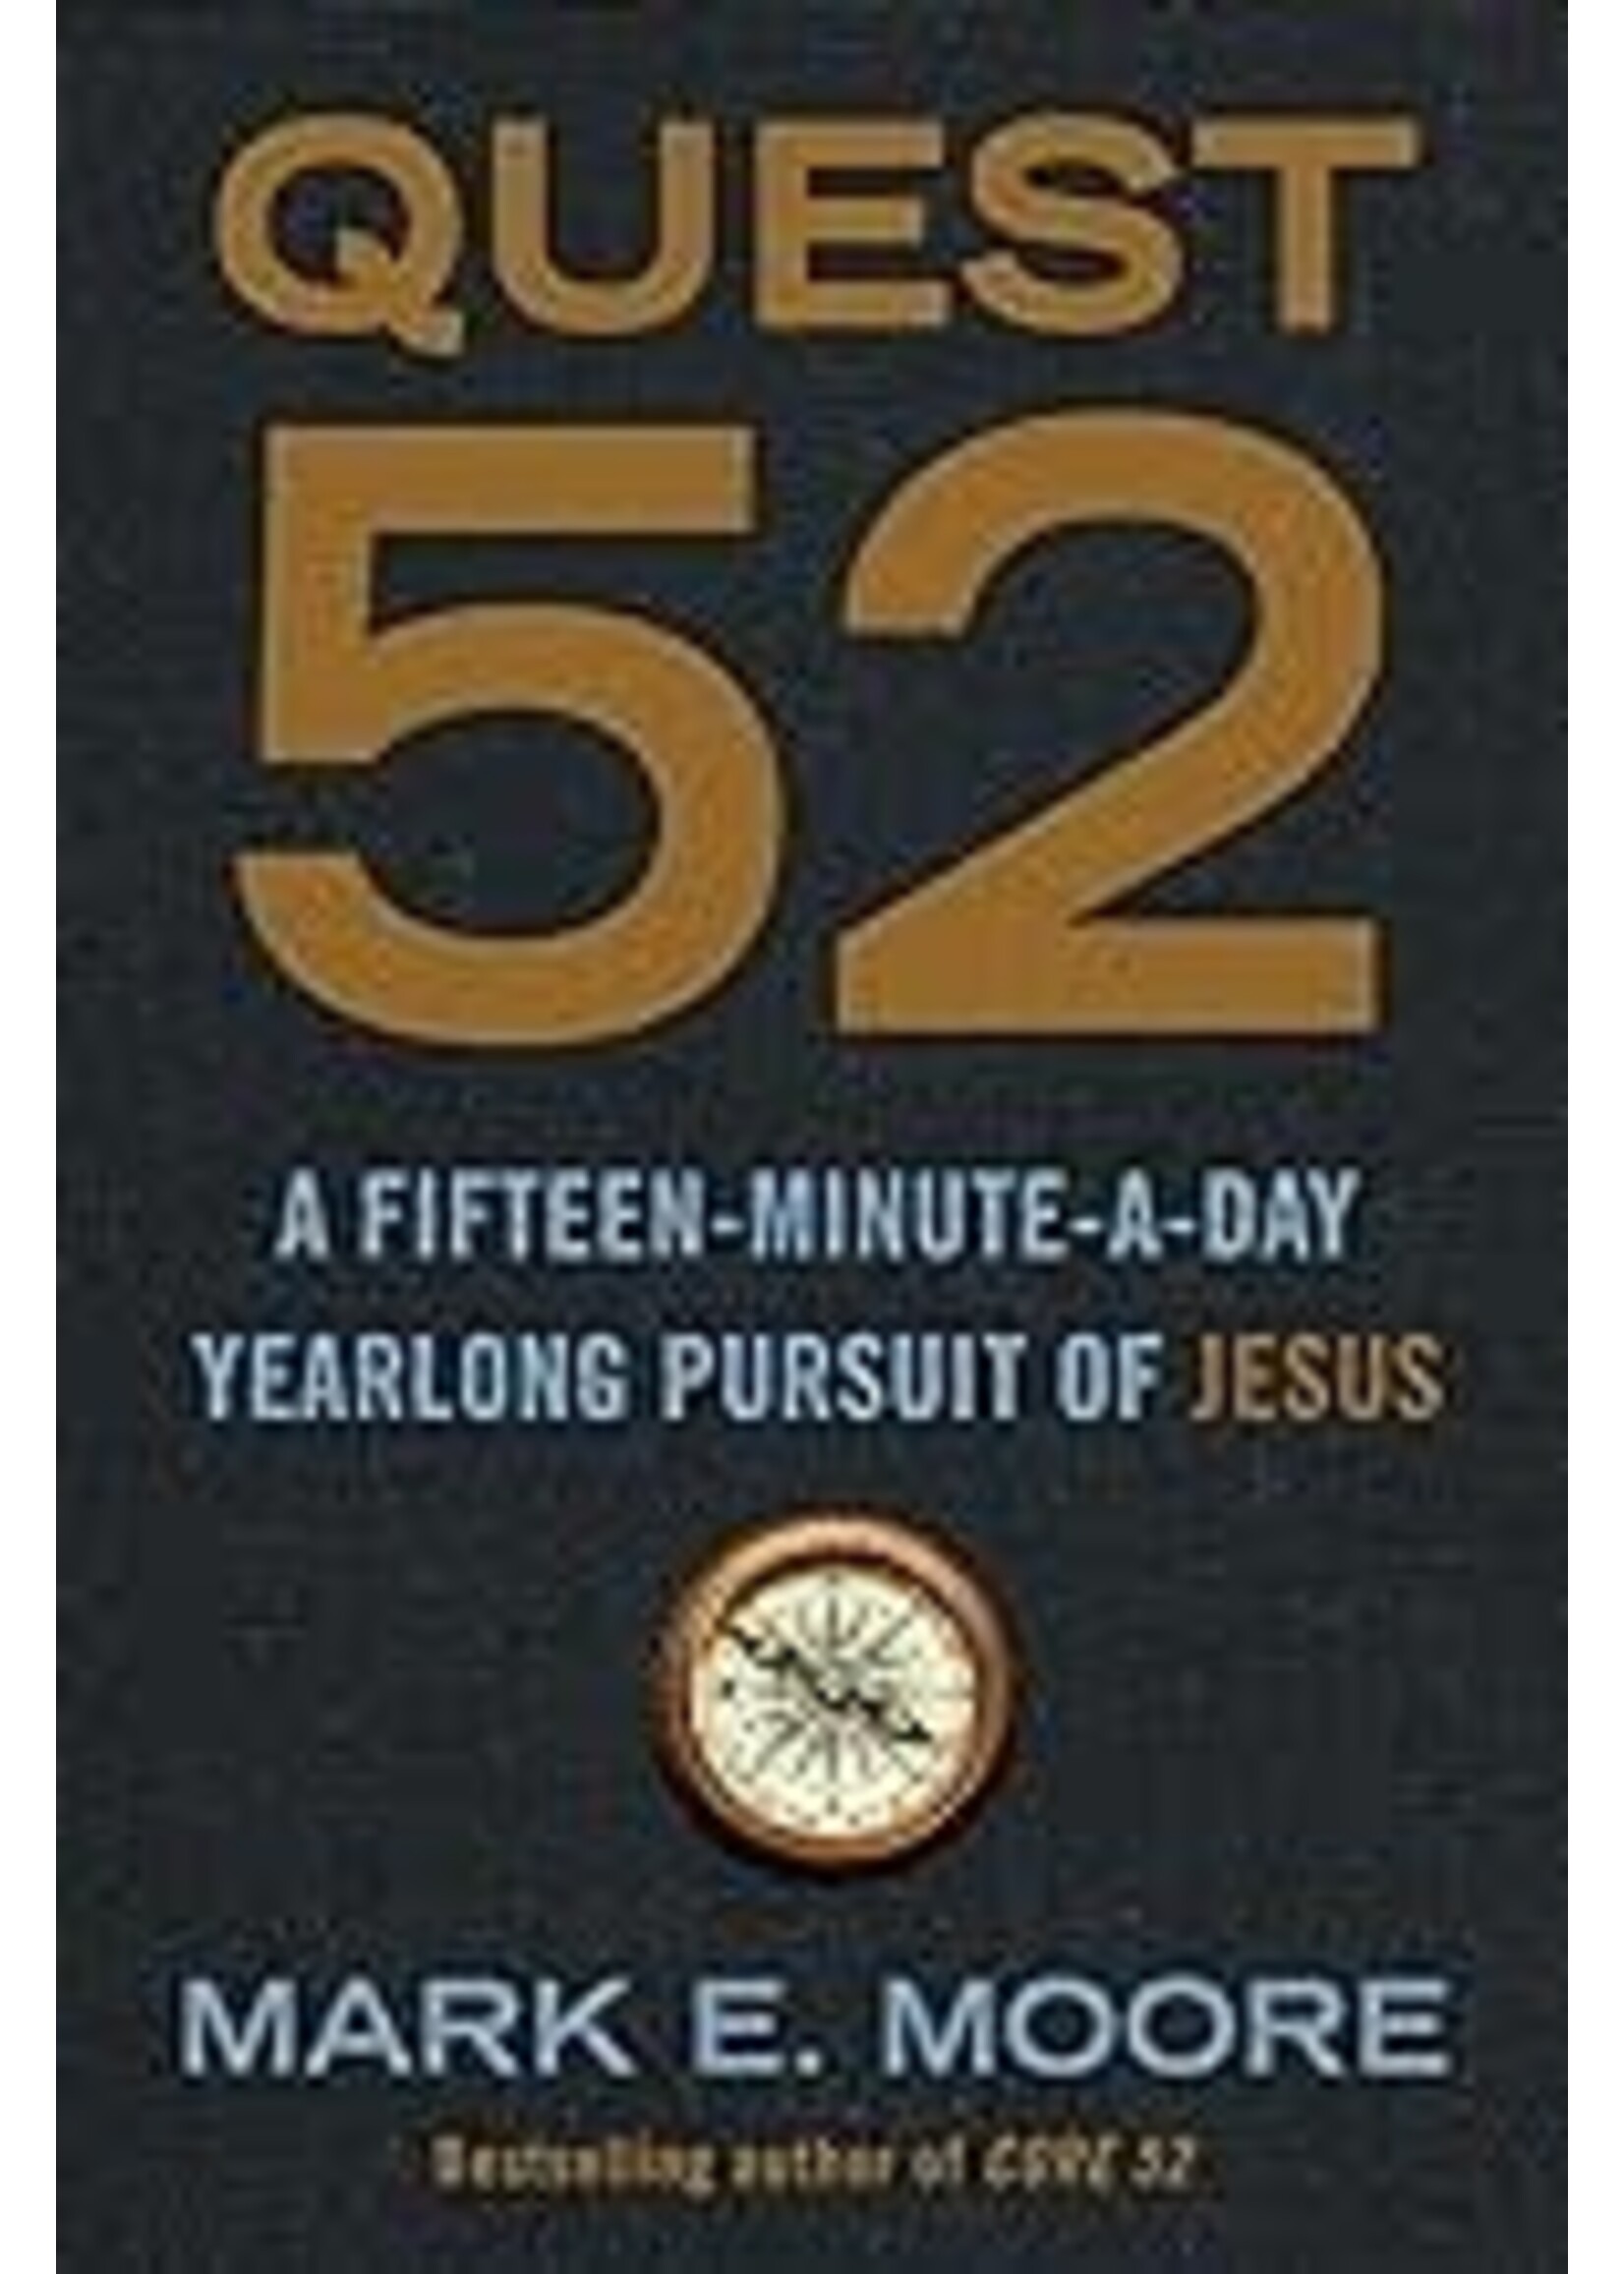 Quest 52 A Fifteen-Minute_A_Day Yearlong Pursuit of Jesus